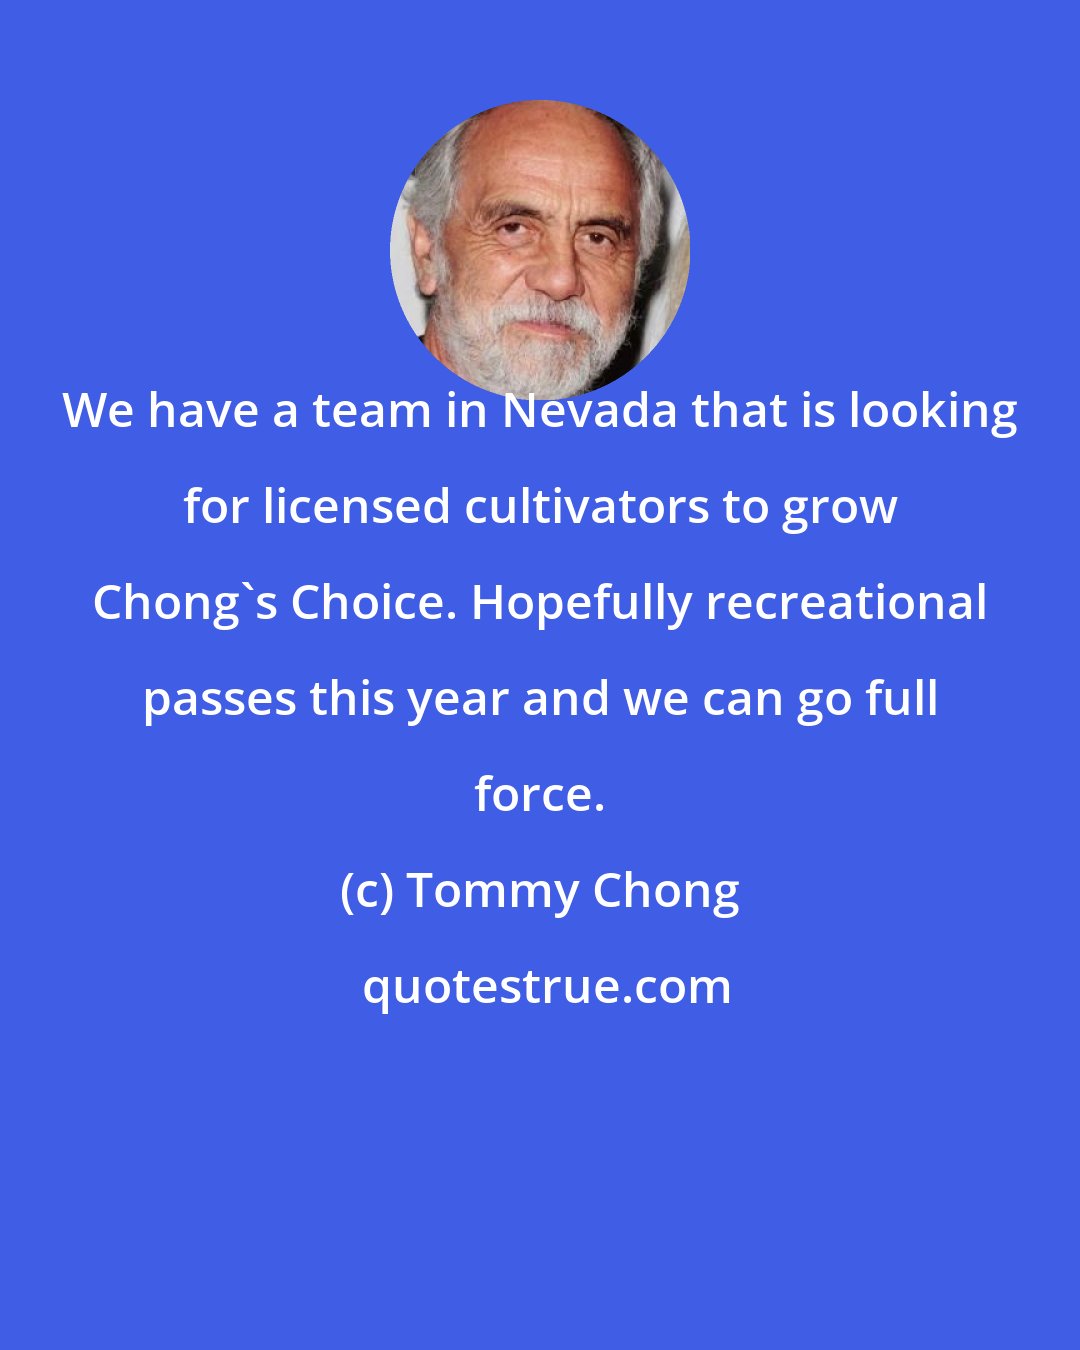 Tommy Chong: We have a team in Nevada that is looking for licensed cultivators to grow Chong's Choice. Hopefully recreational passes this year and we can go full force.